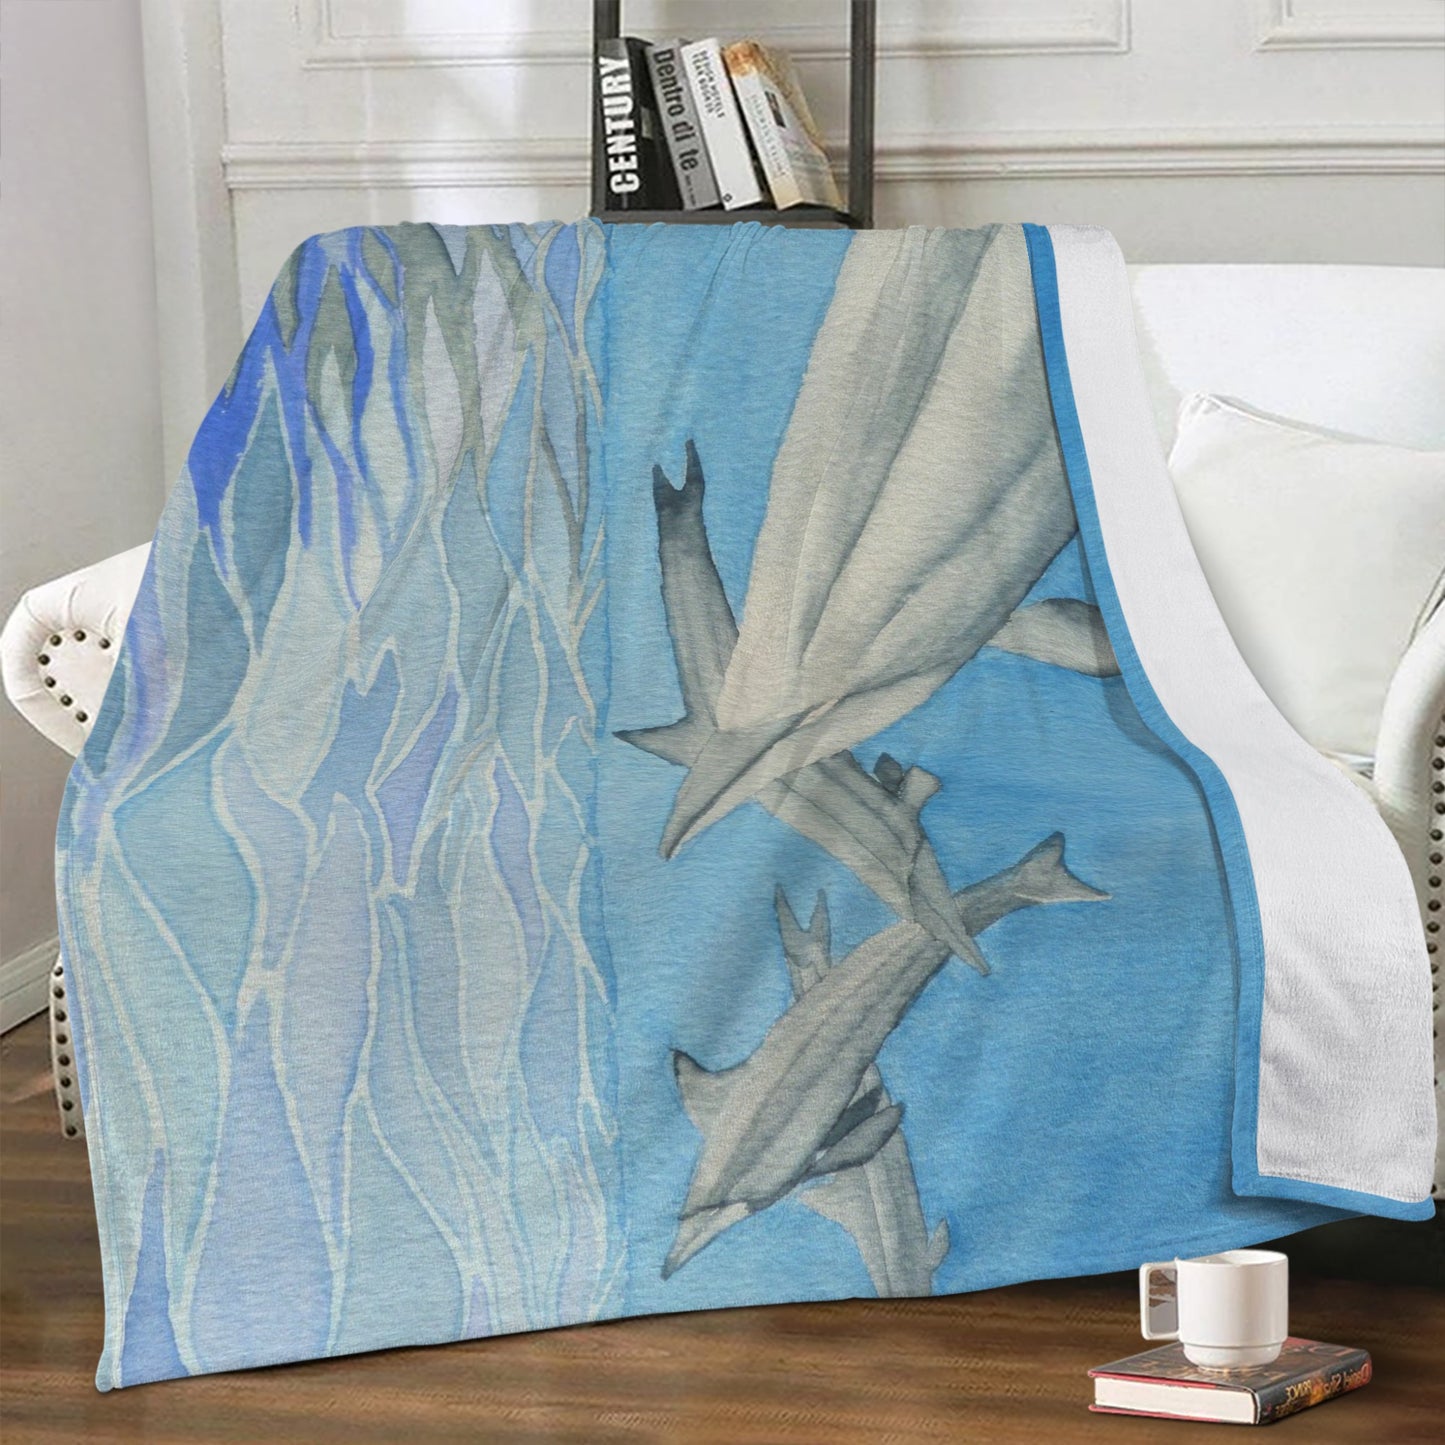 Dolphins at 2 step Watercolor Plush Fleece Blanket